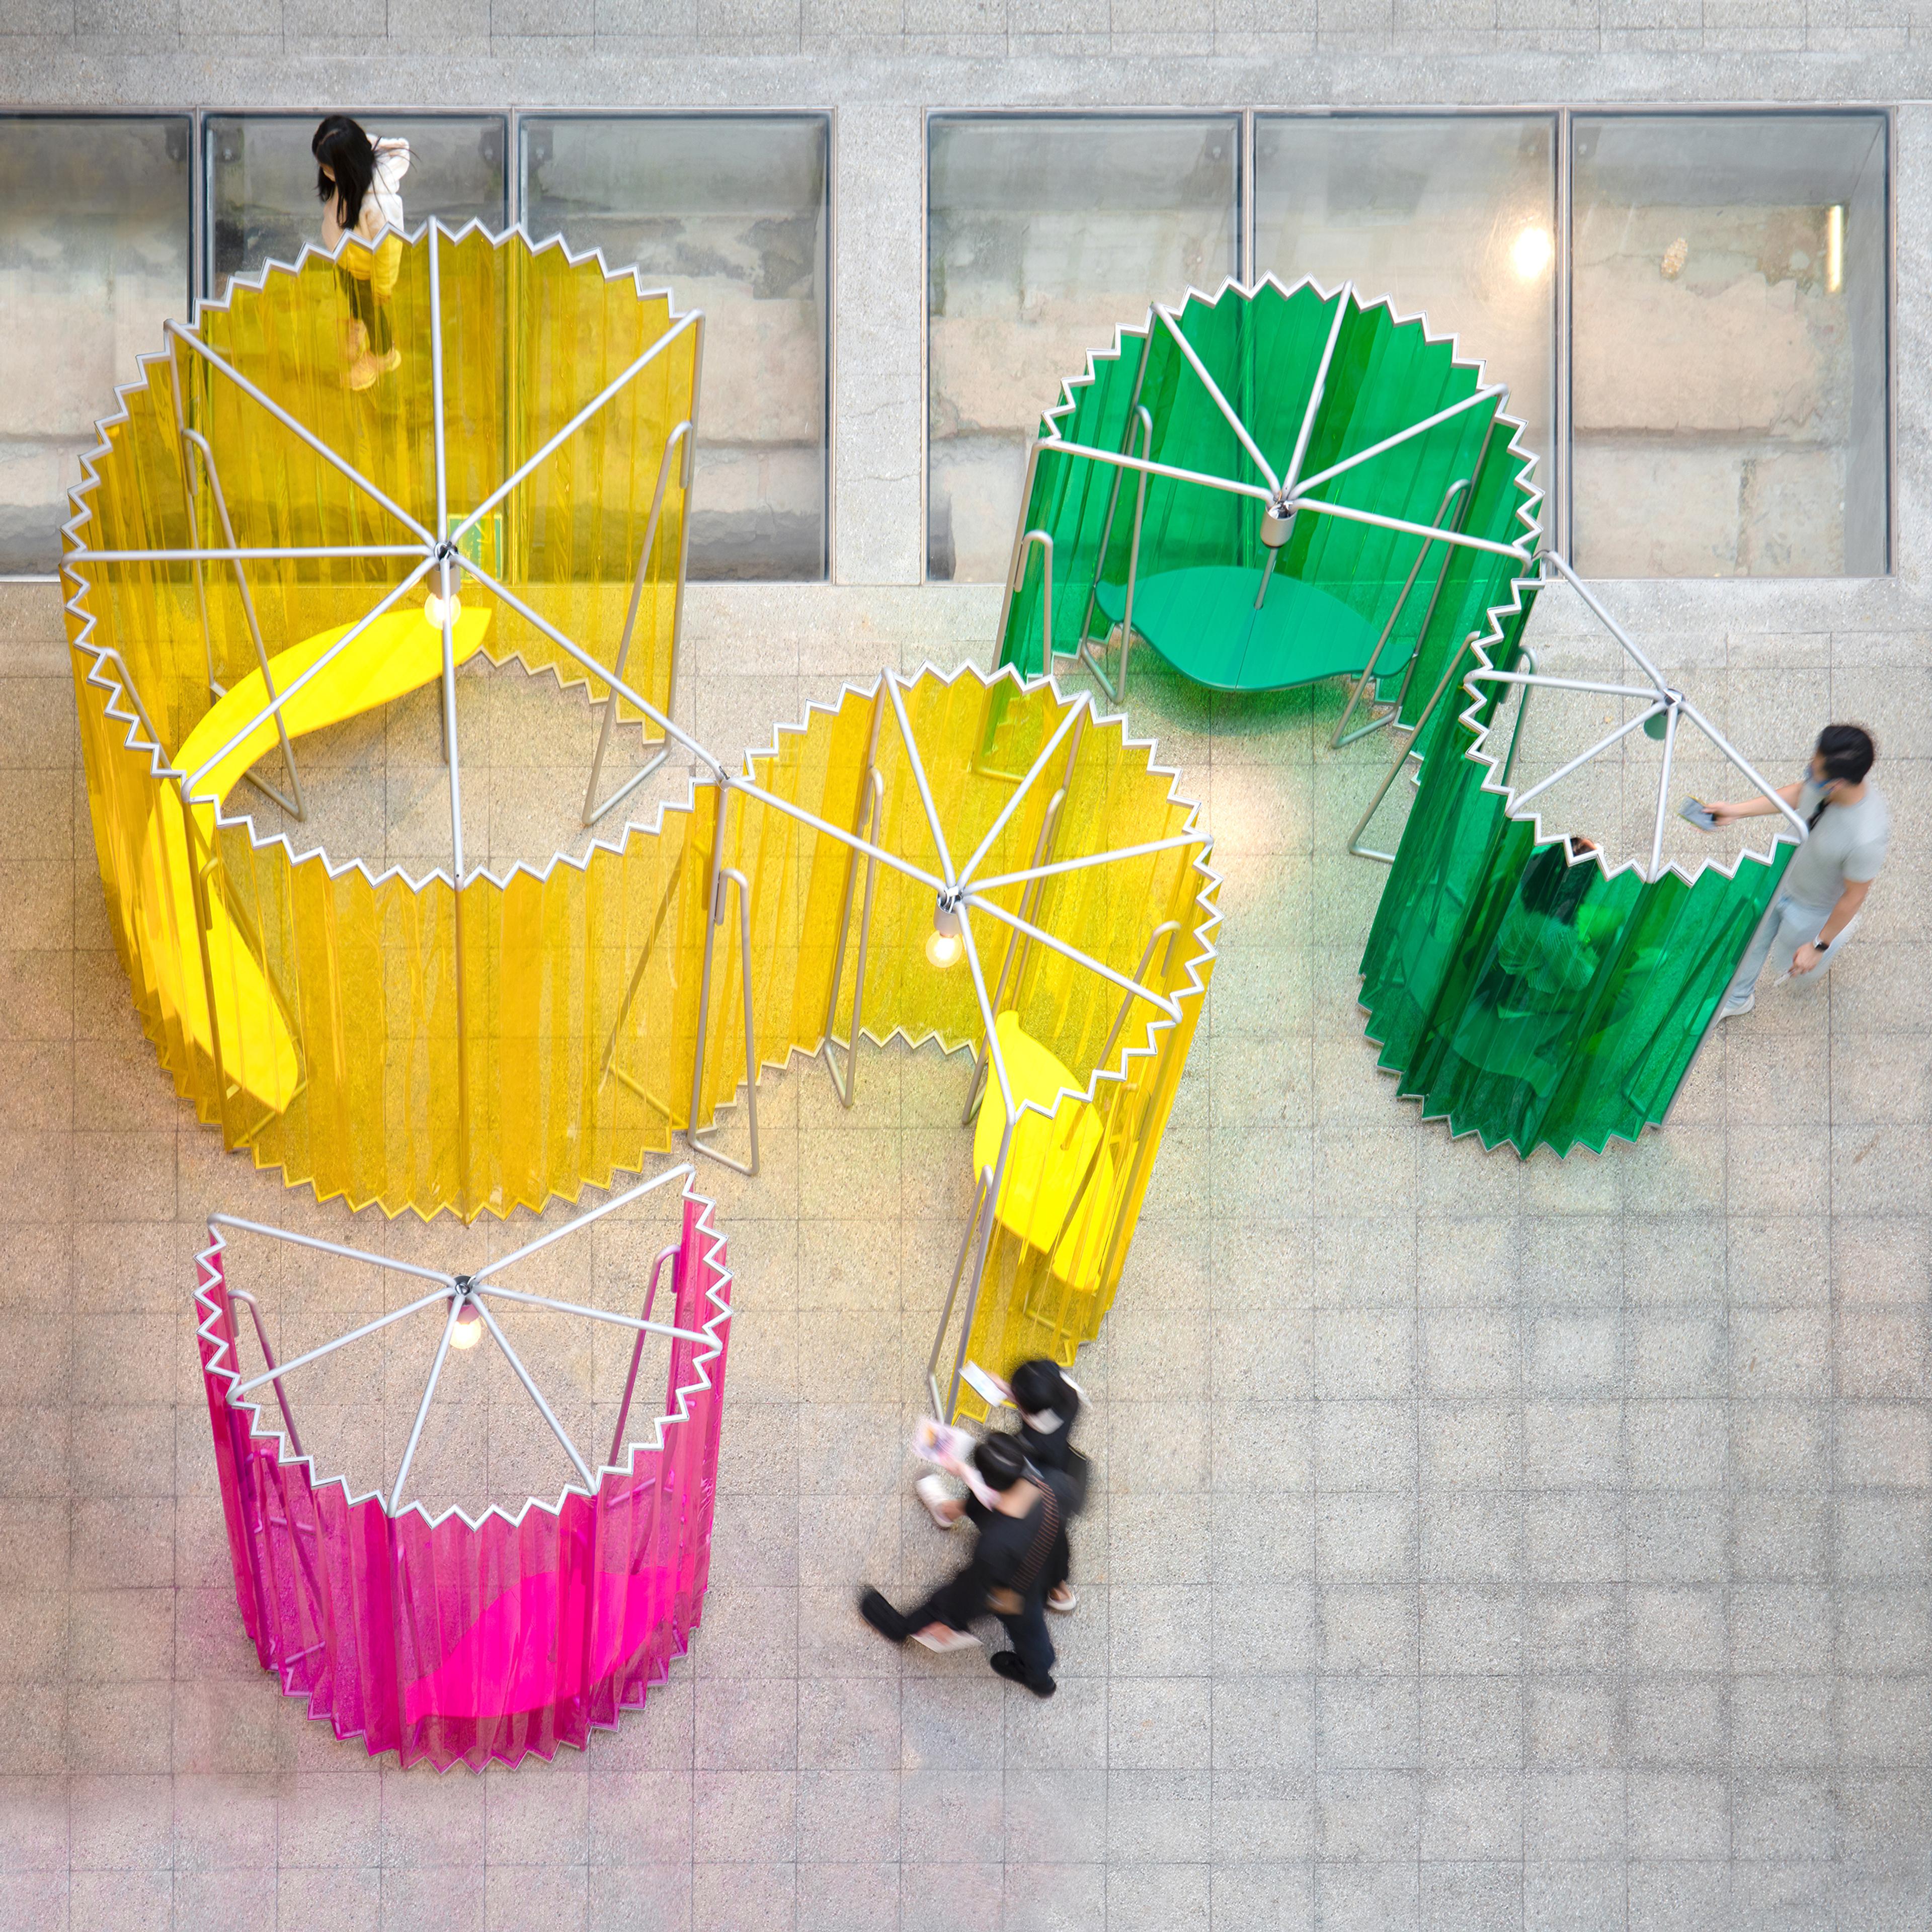 top down view of colorful installation inside building courtyard